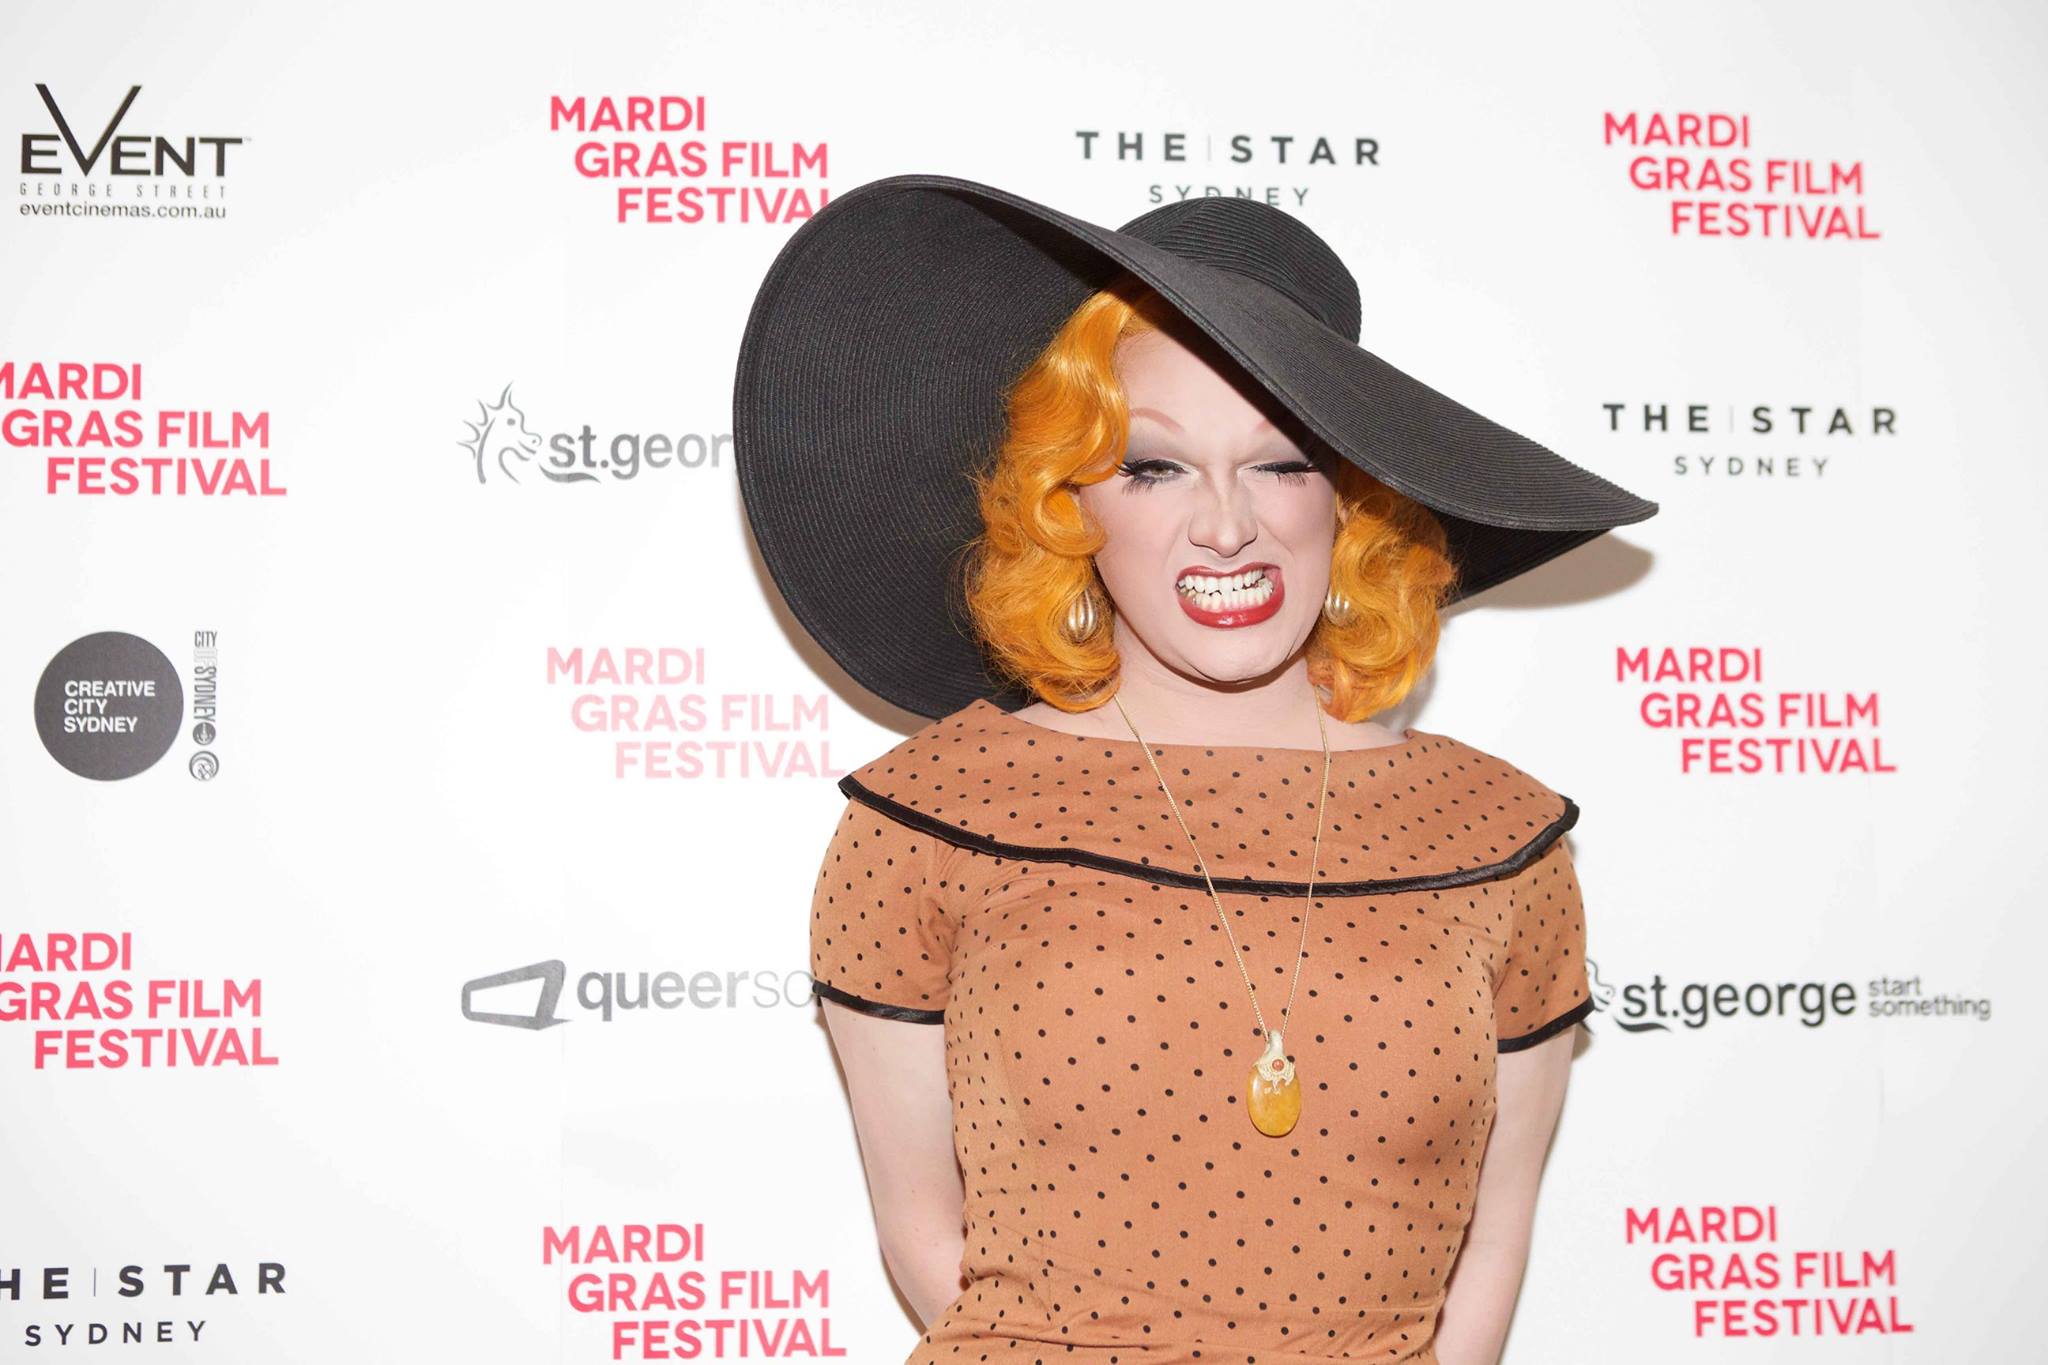 Jinkx Monsoon talks about her documentary Drag Becomes Him for MGFF